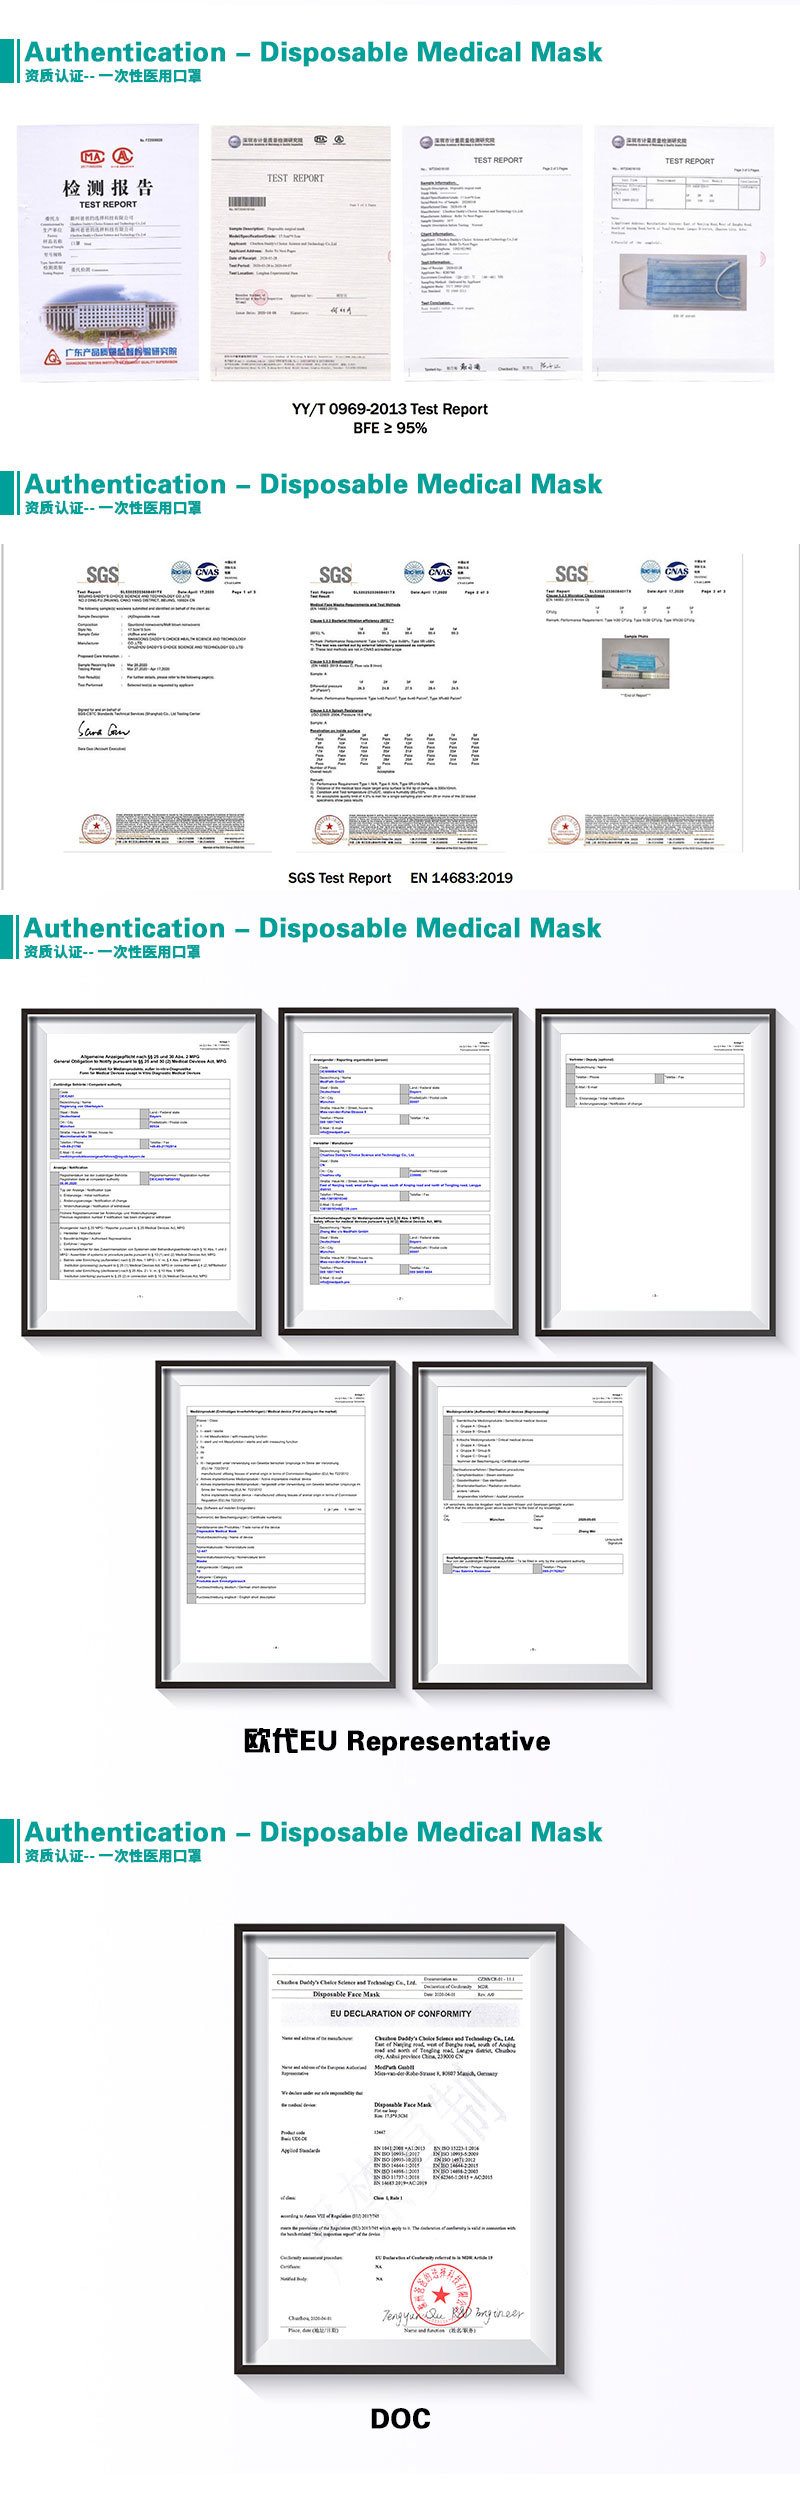 Disposable Non-Woven 3ply Medical Face Mask Lowest Price Factory Price Manufacture Price